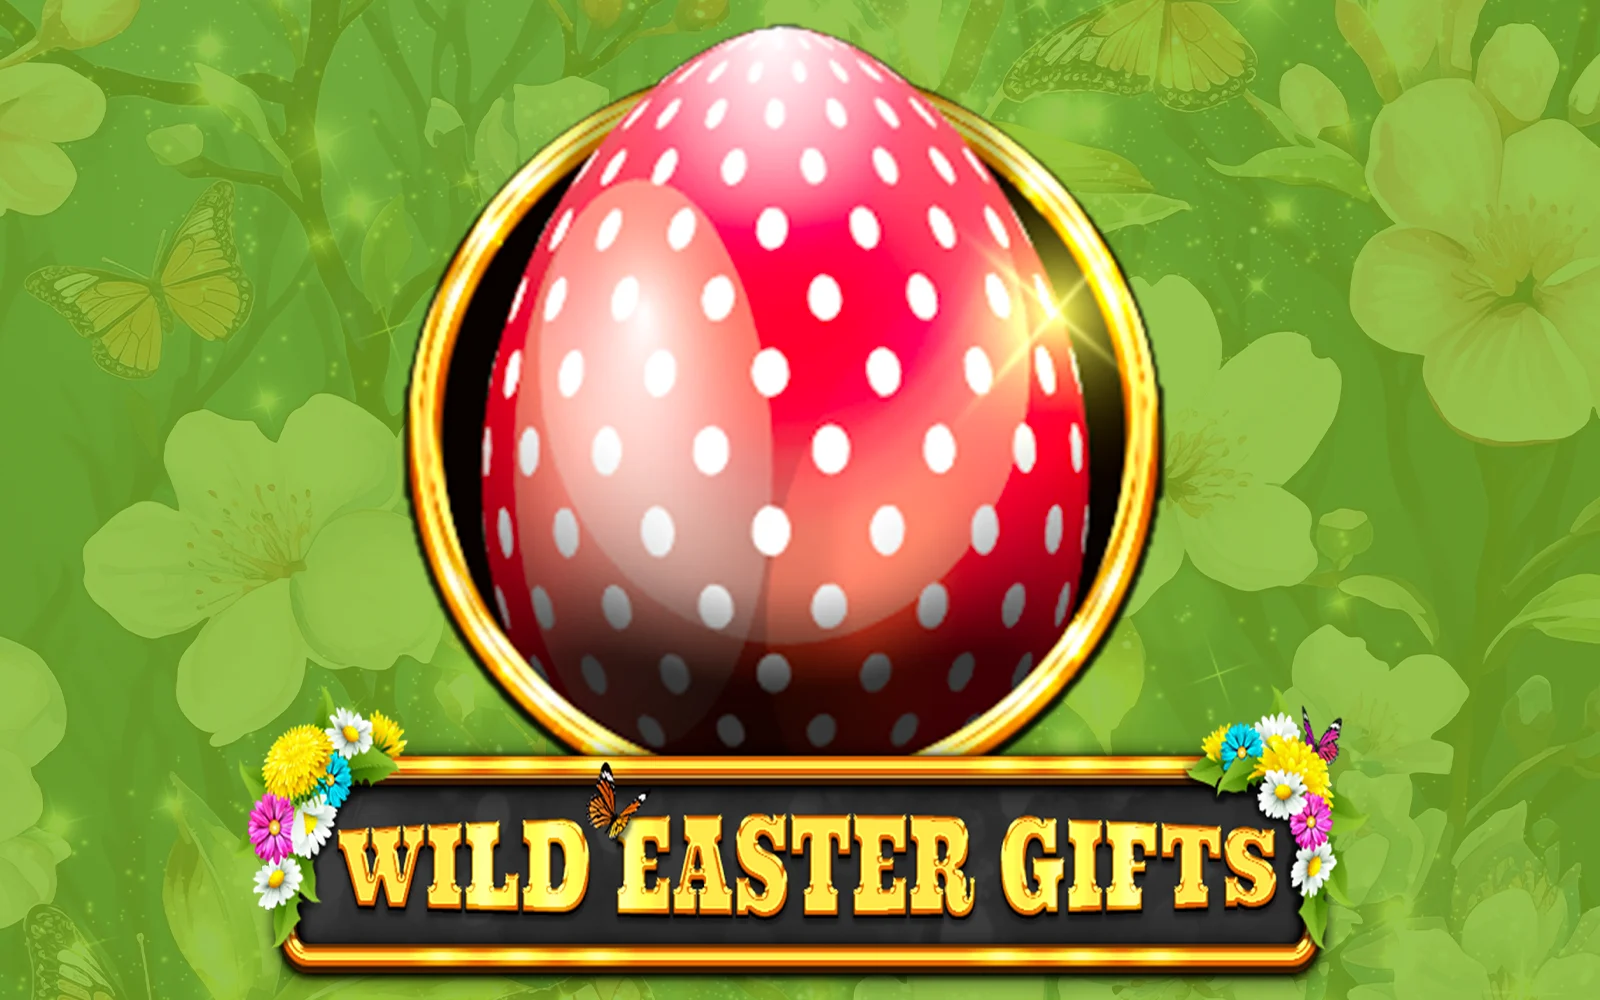 Play Wild Easter Gifts on Starcasino.be online casino